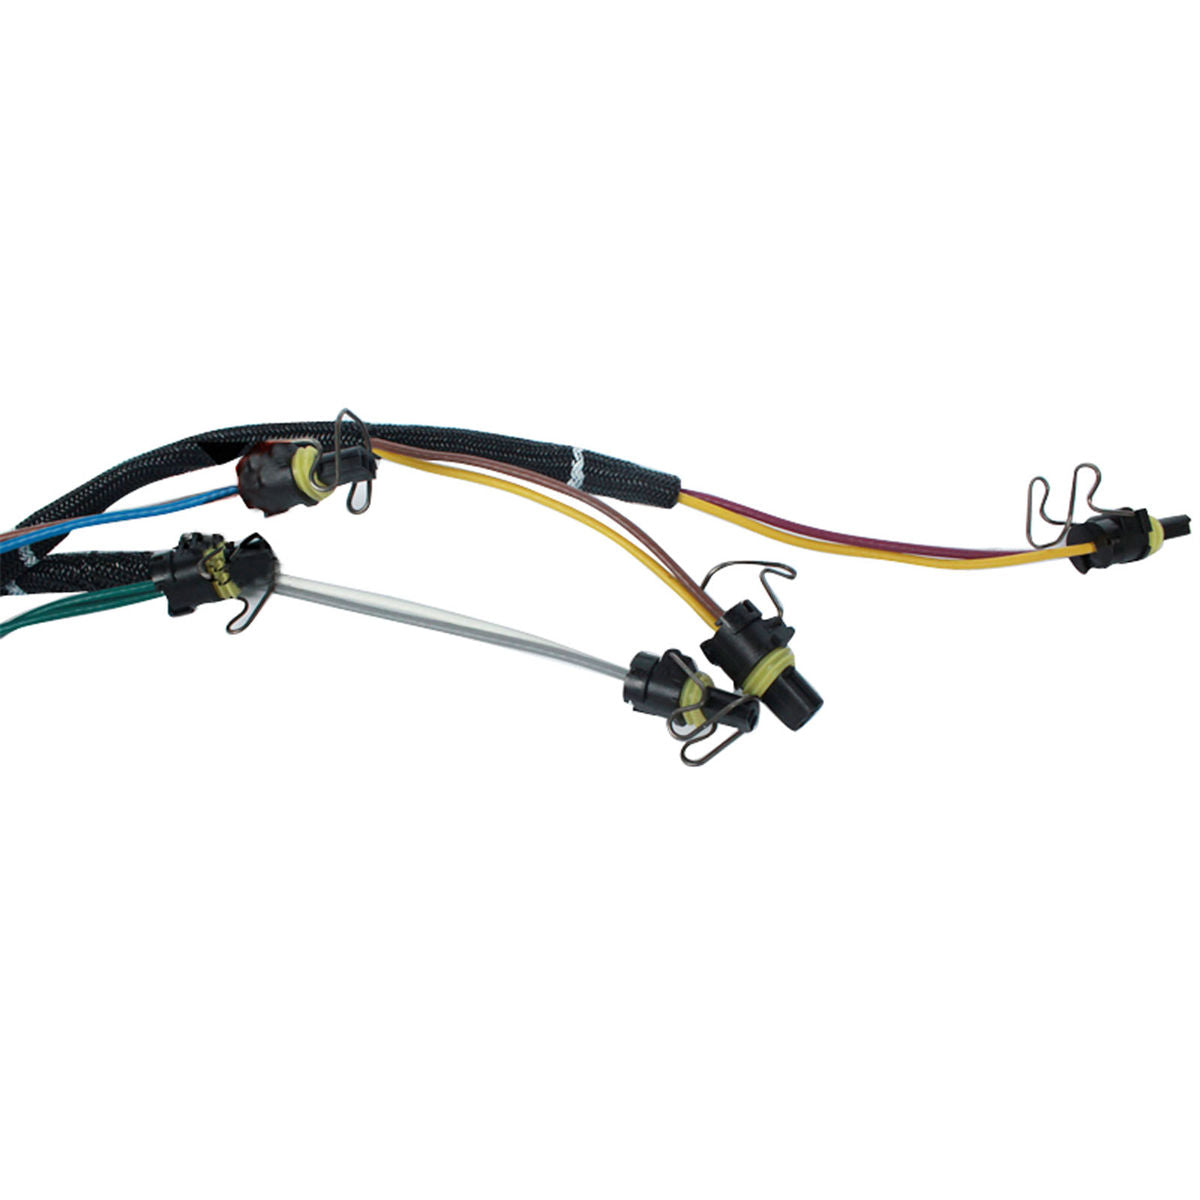 4190841 Injector Wiring Harness for CAT 330D C9 C-9 Engine - Sinocmp